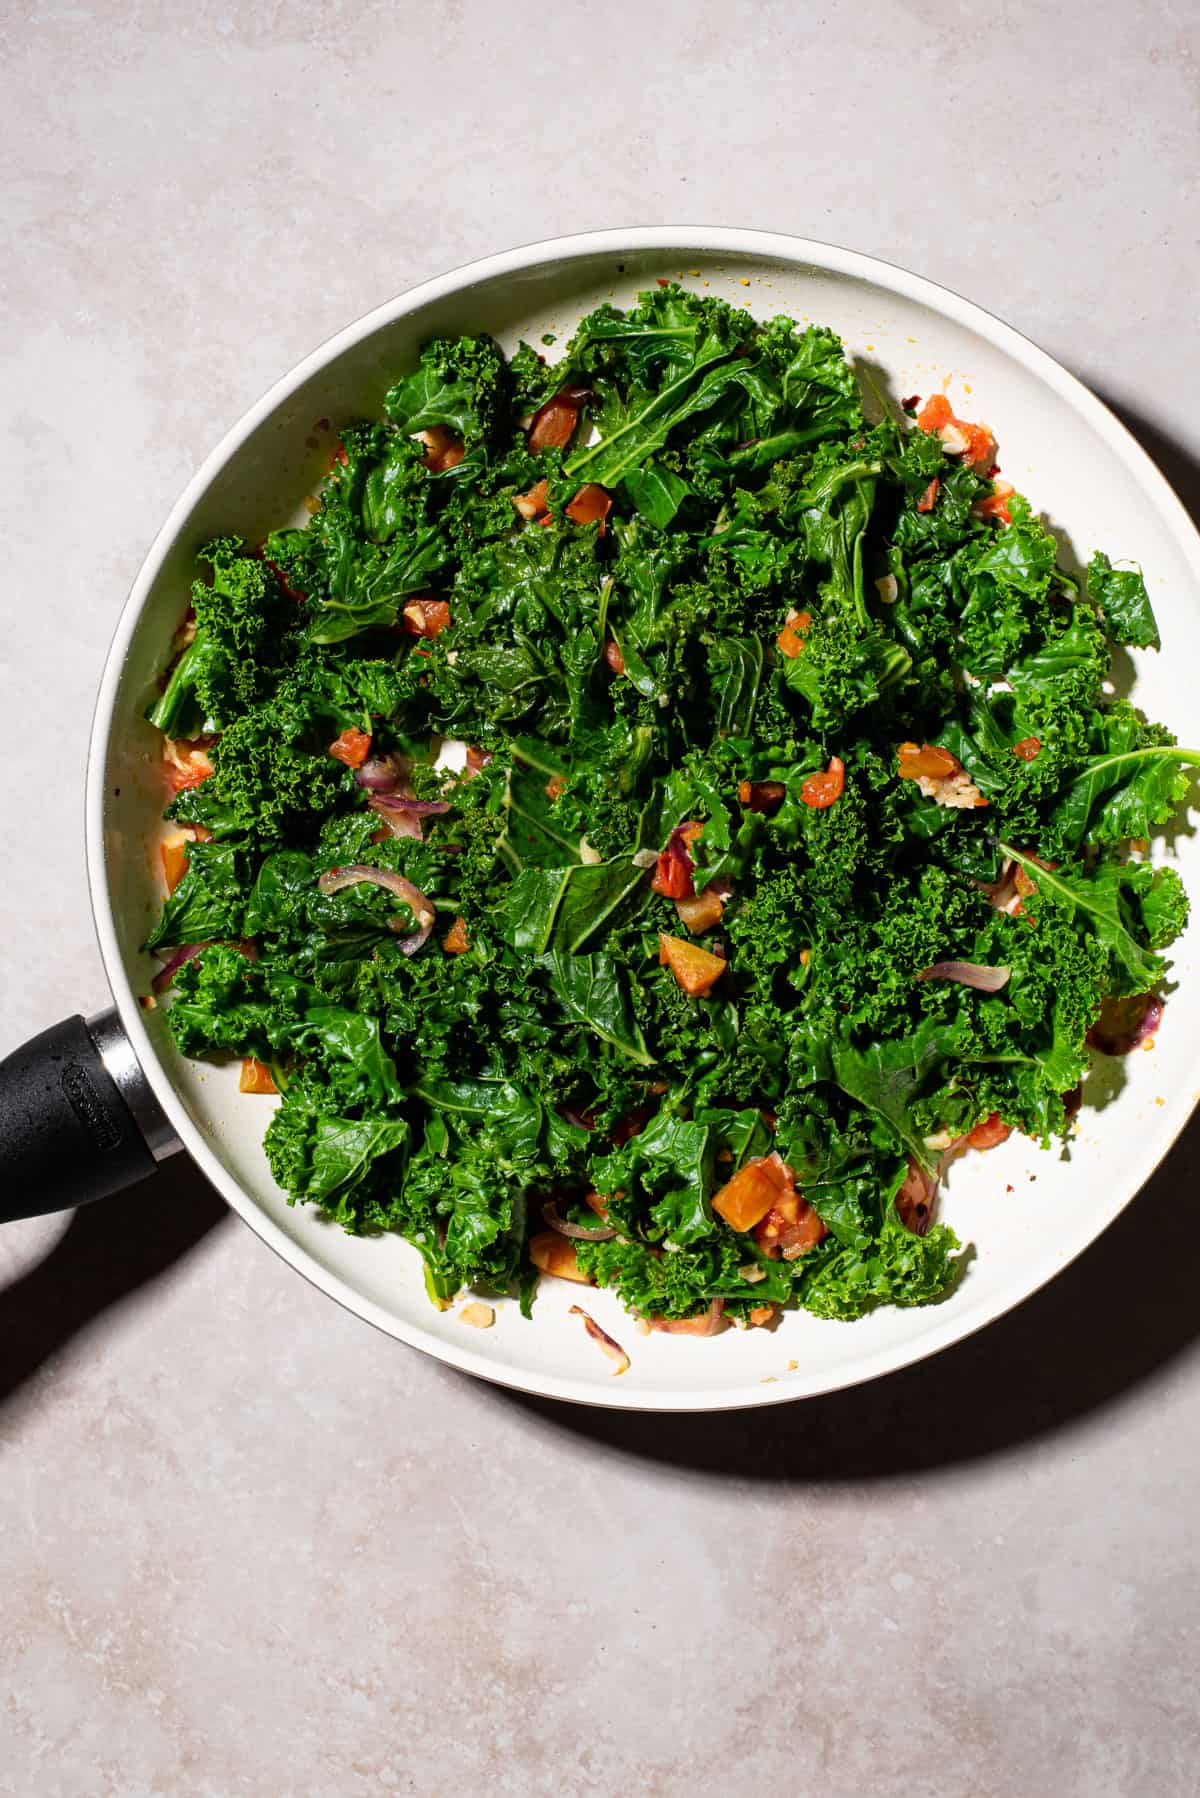 Sautéed kale with tomatoes in a skillet.